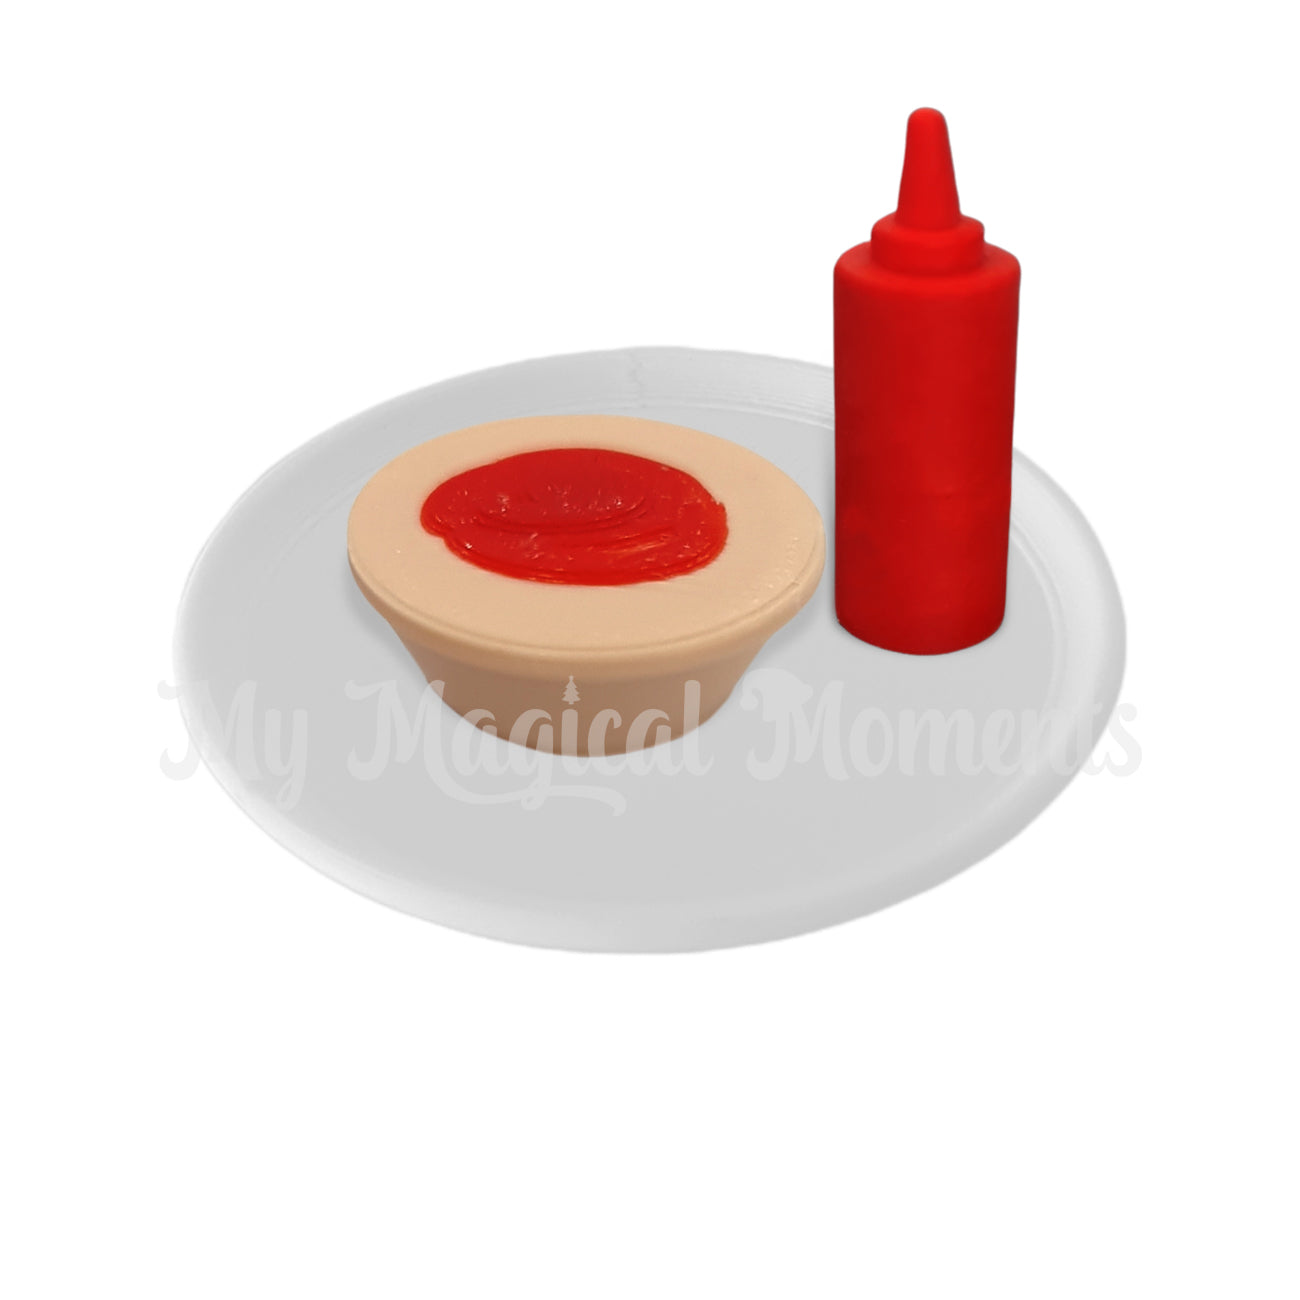 miniature Pie And Sauce on a plate